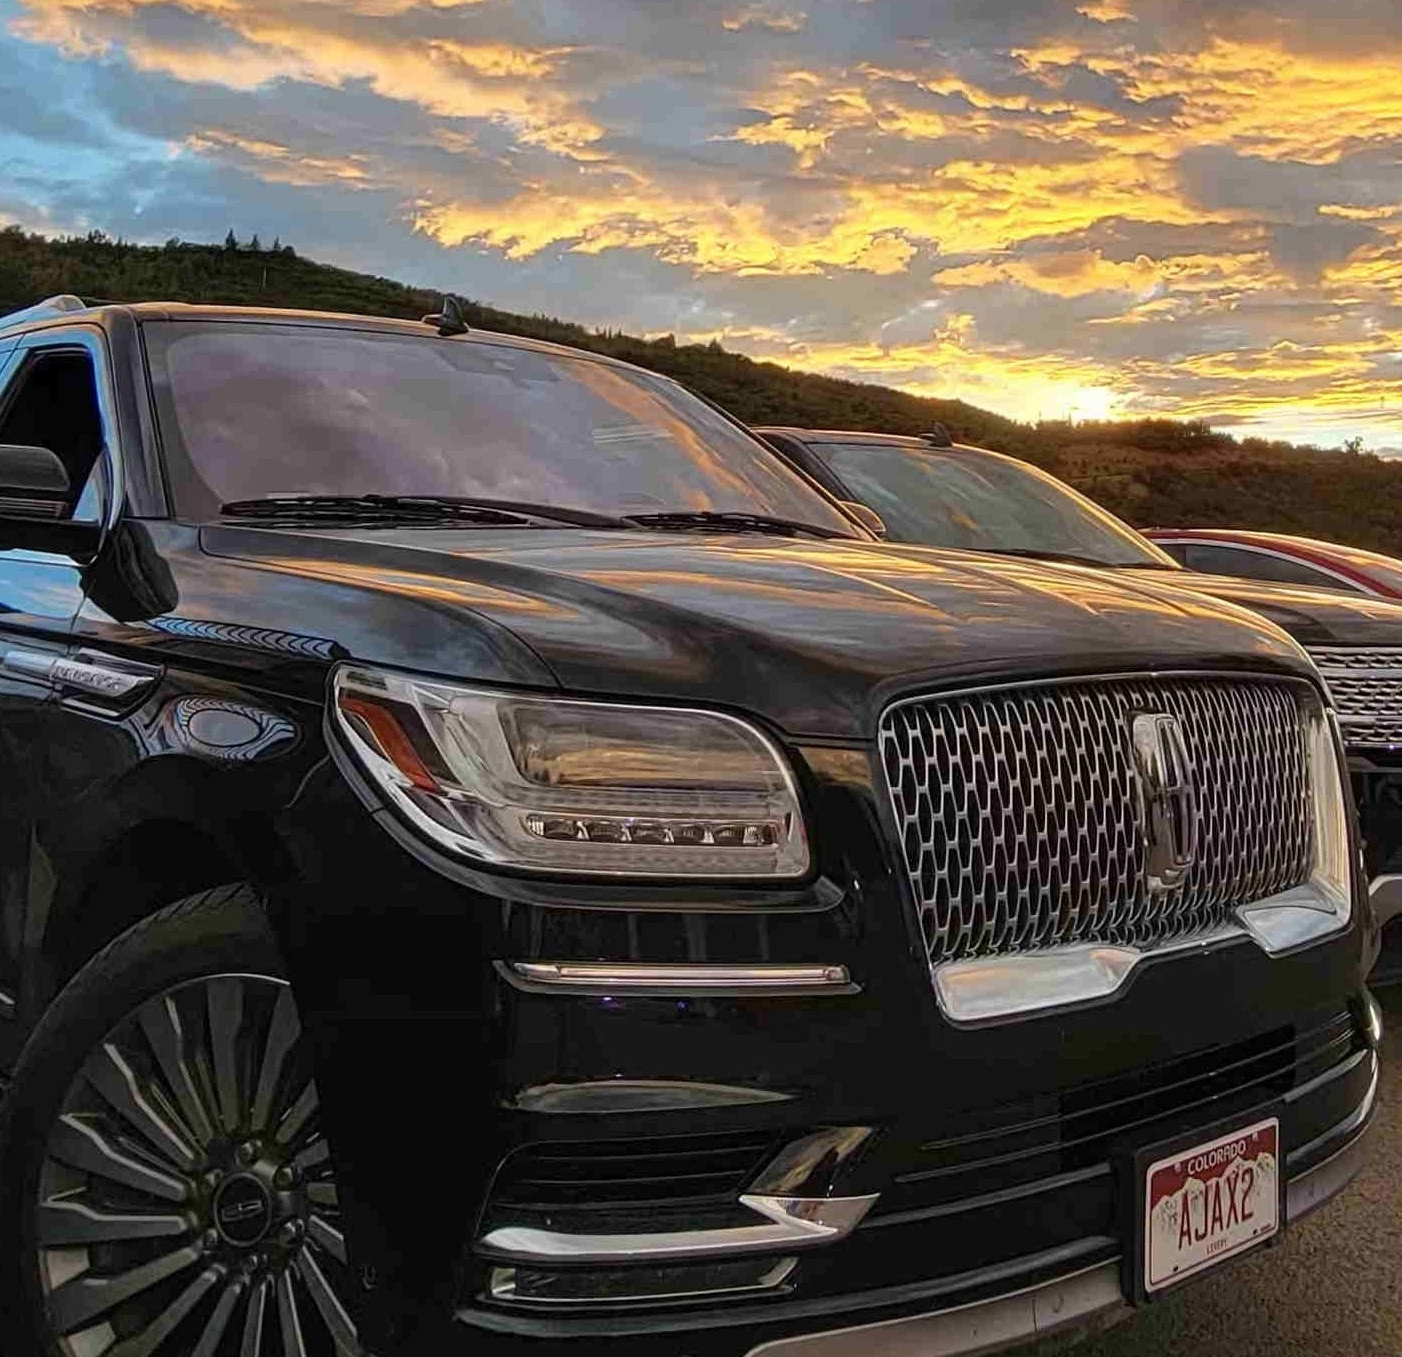 Sunset over a Black Canyon Limo vehicle